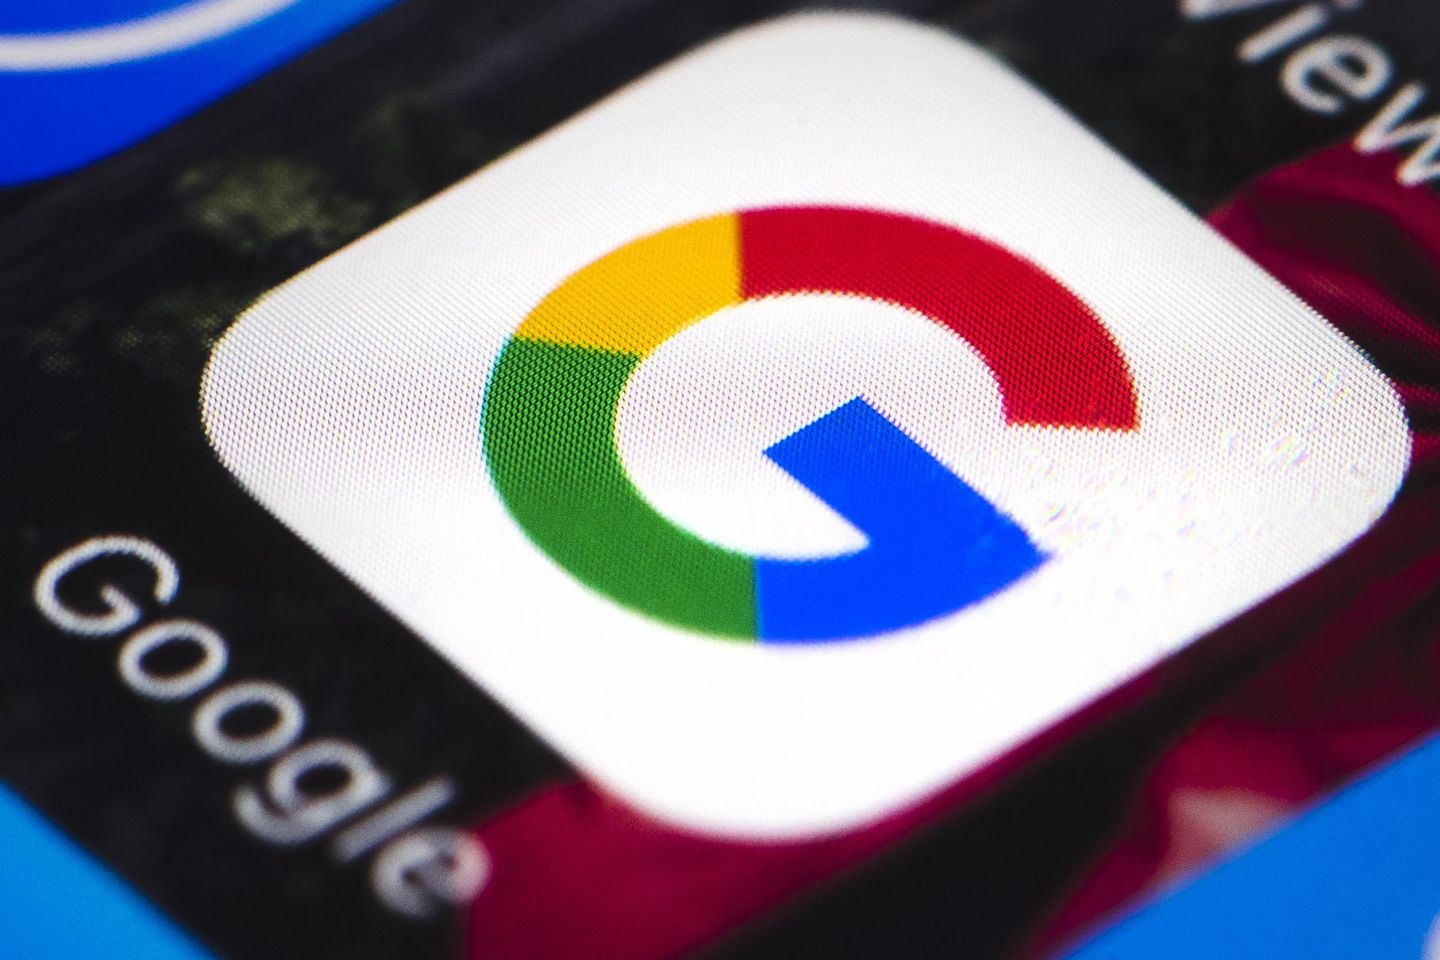 Google ordered to pay nearly $1 million in legal fees for misconduct